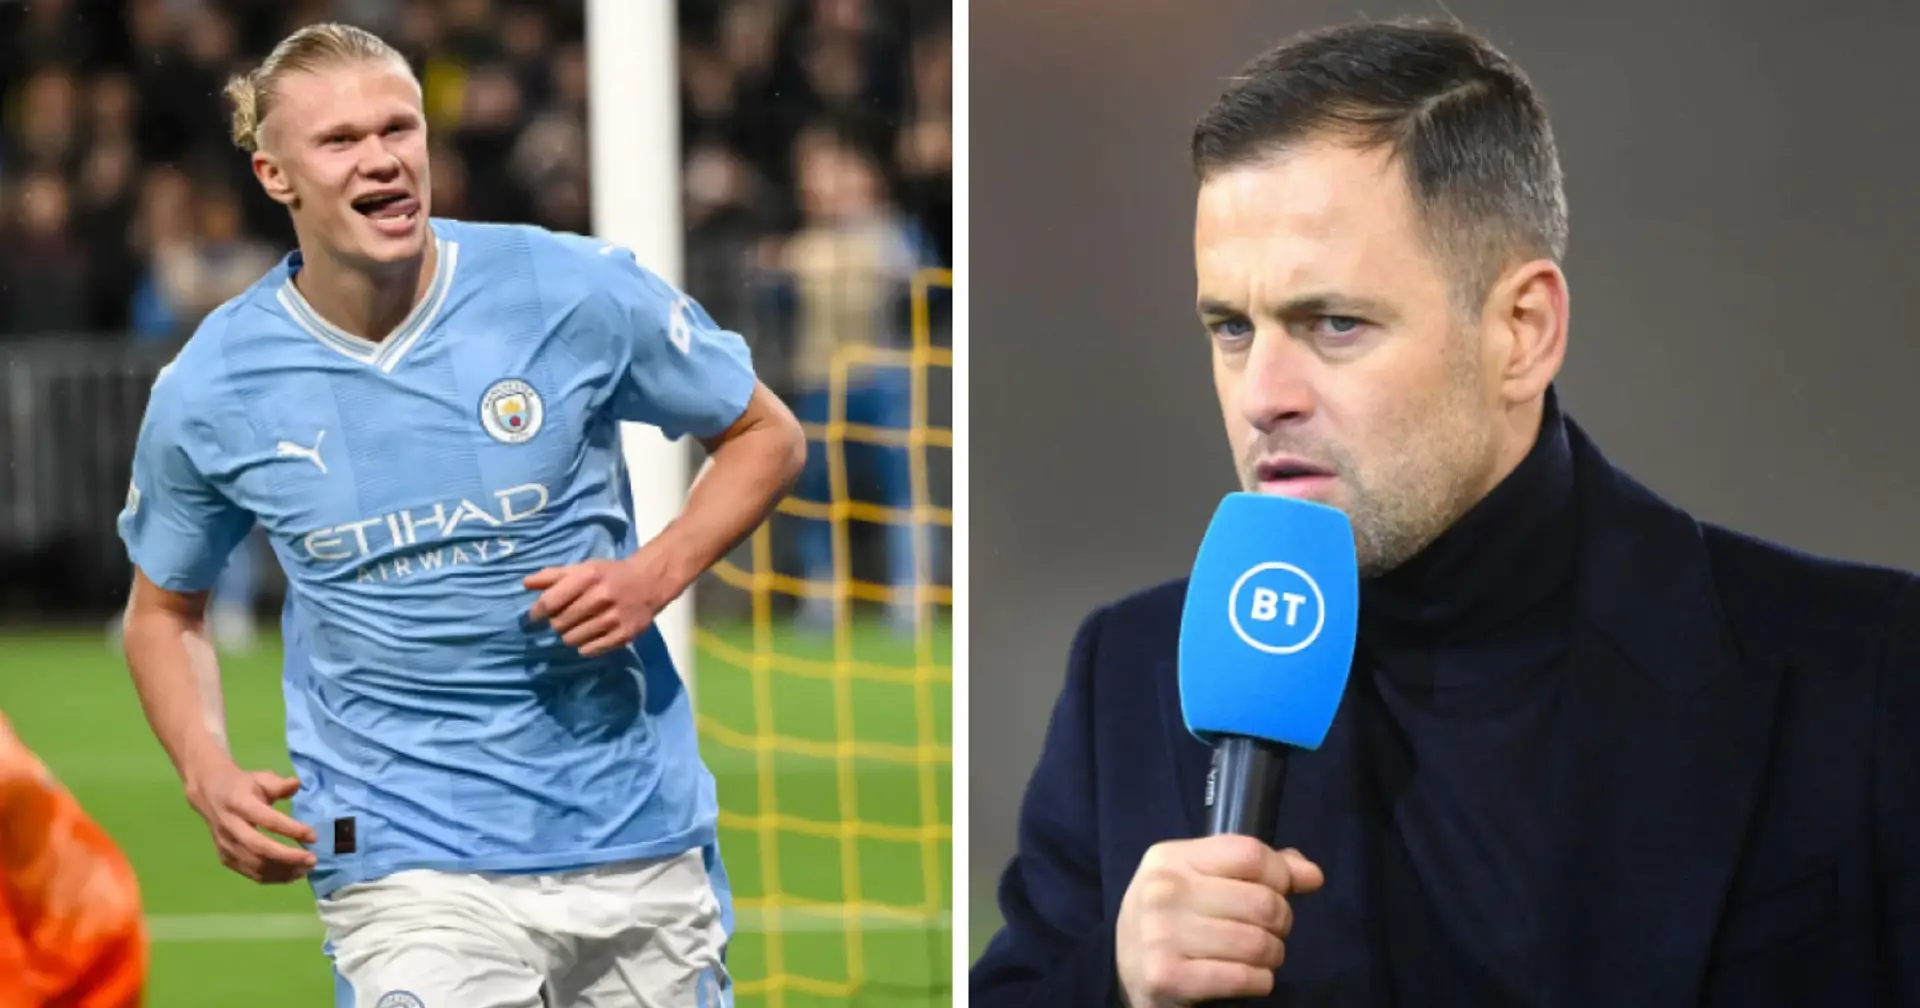 '52 goals will be a regular thing for him': Joe Cole on Haaland's performance in Man City